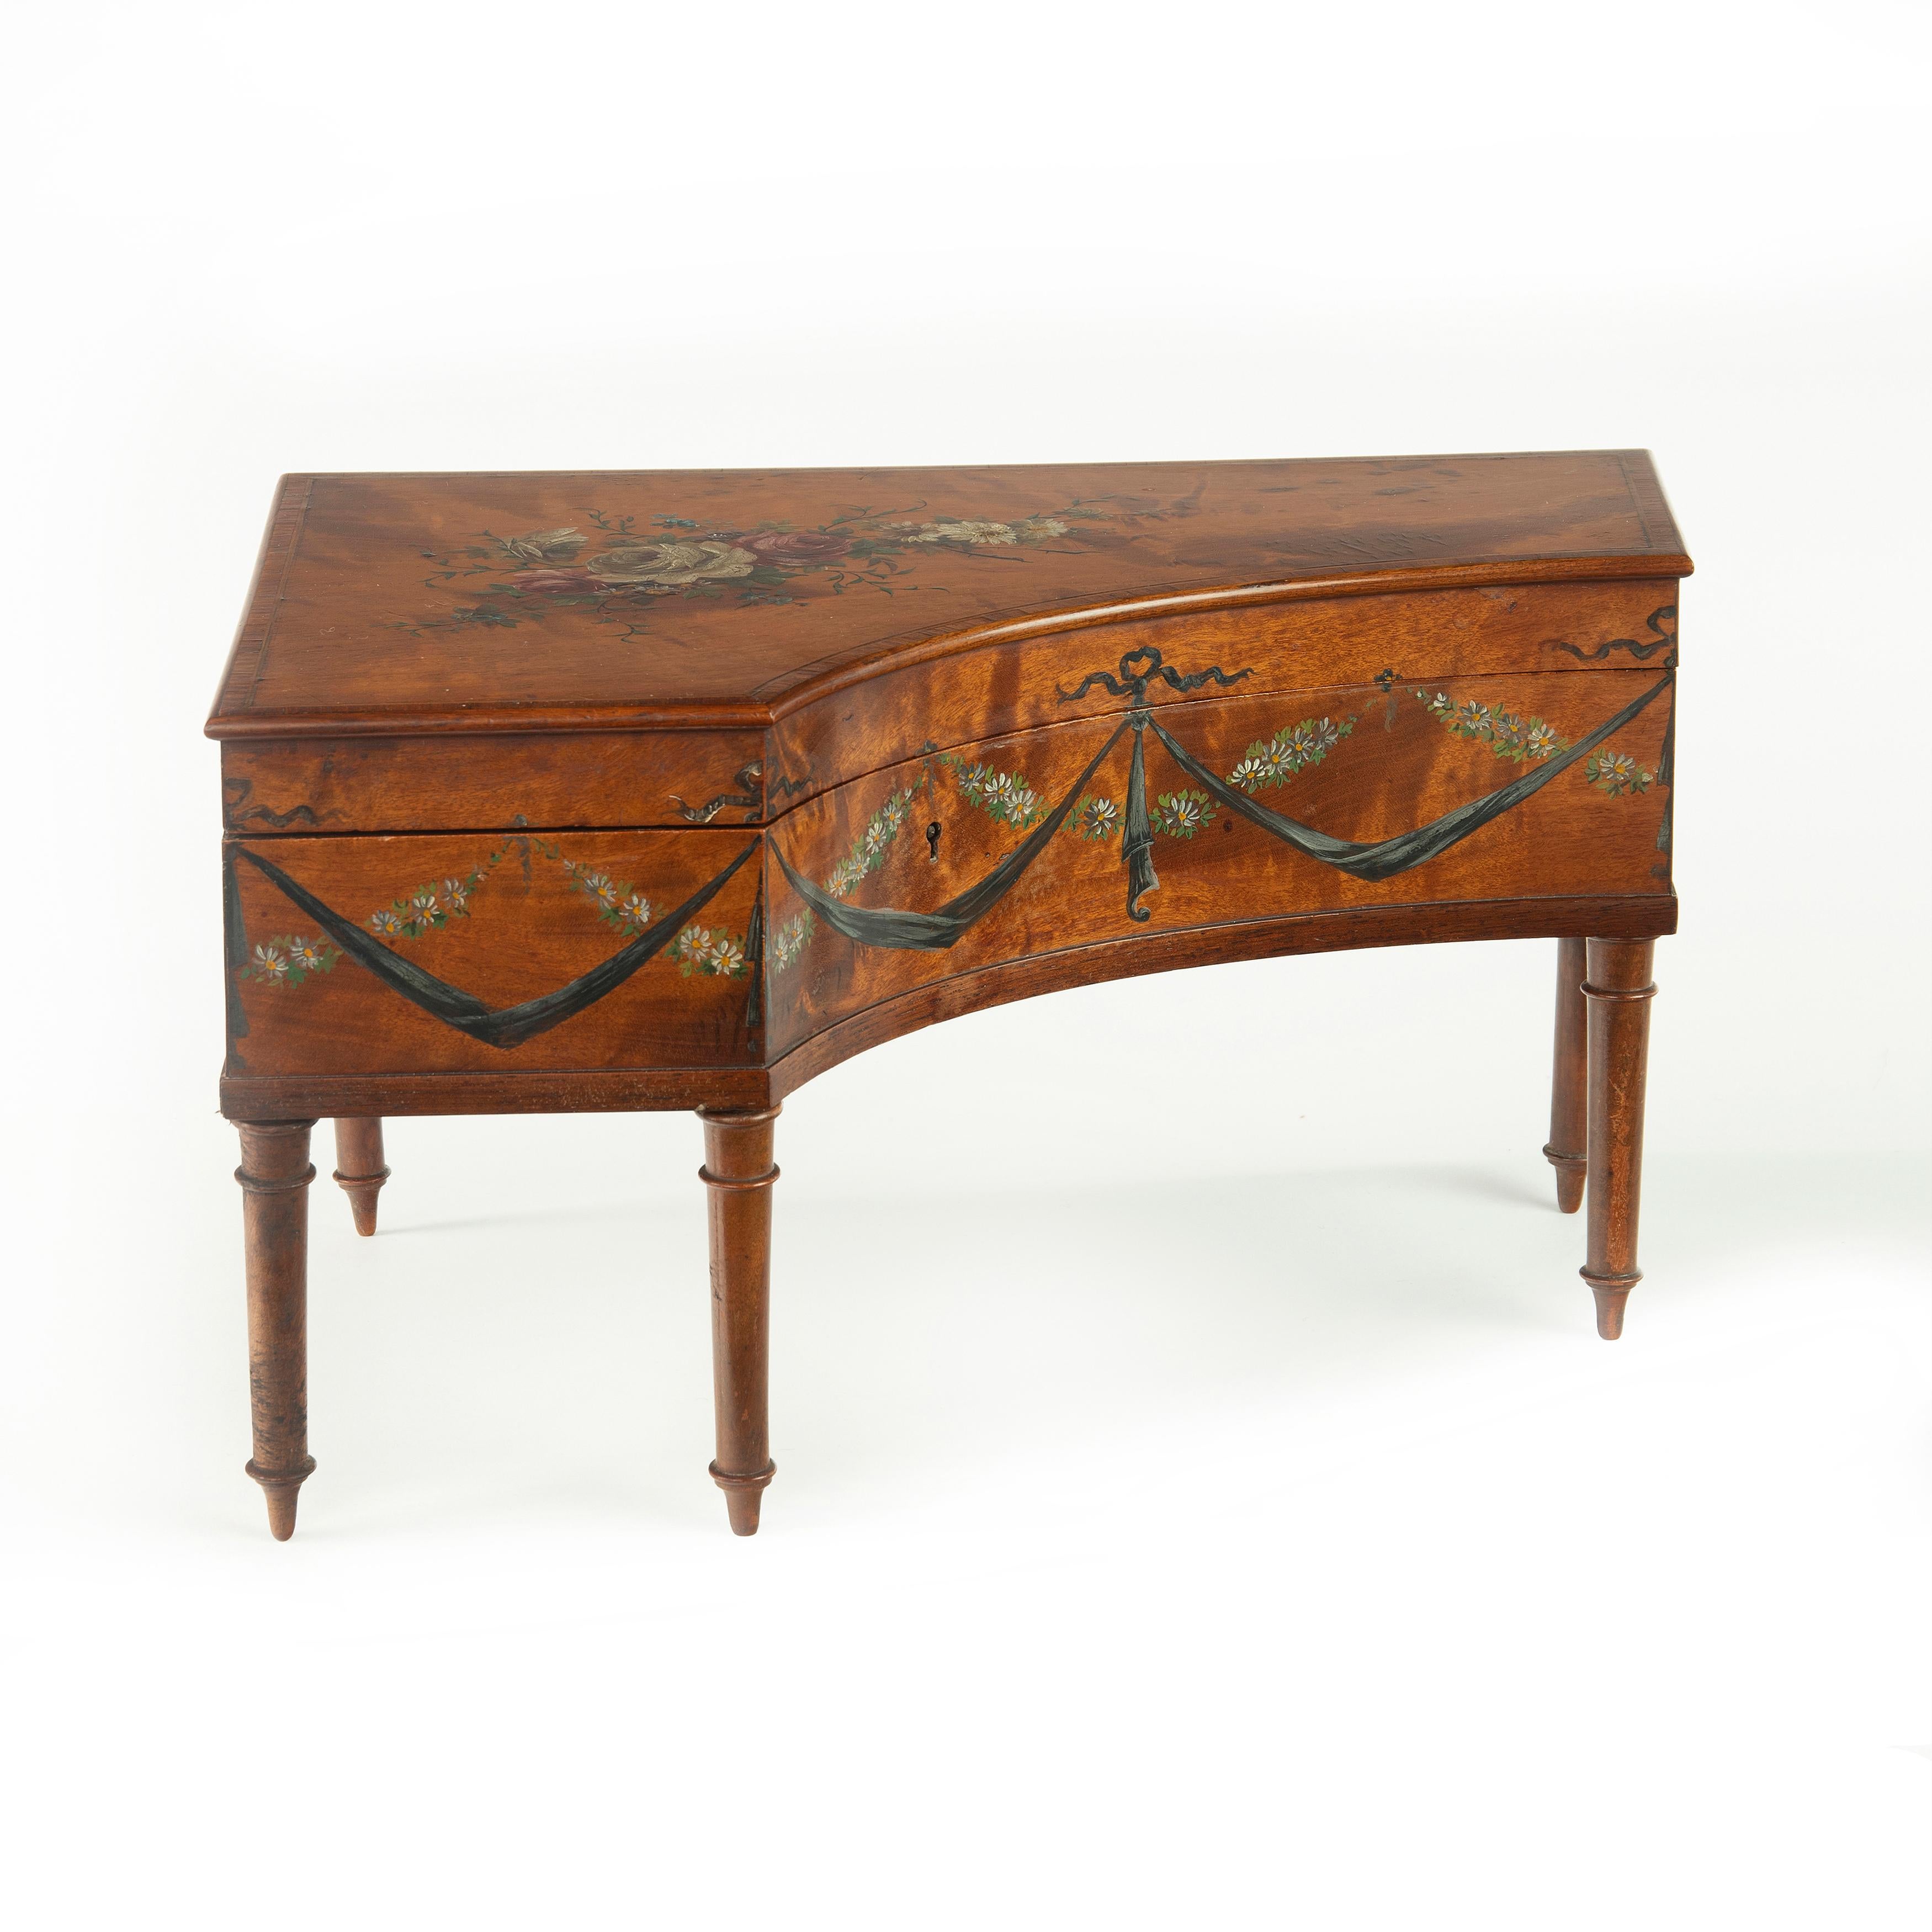 An Irish miniature satinwood piano sewing box painted by Herbert Cooper, in the form of a grand piano with a hinged lid opening to reveal a silk lined interior, decorated with a painted central spray of roses on the lid and daisy chains with